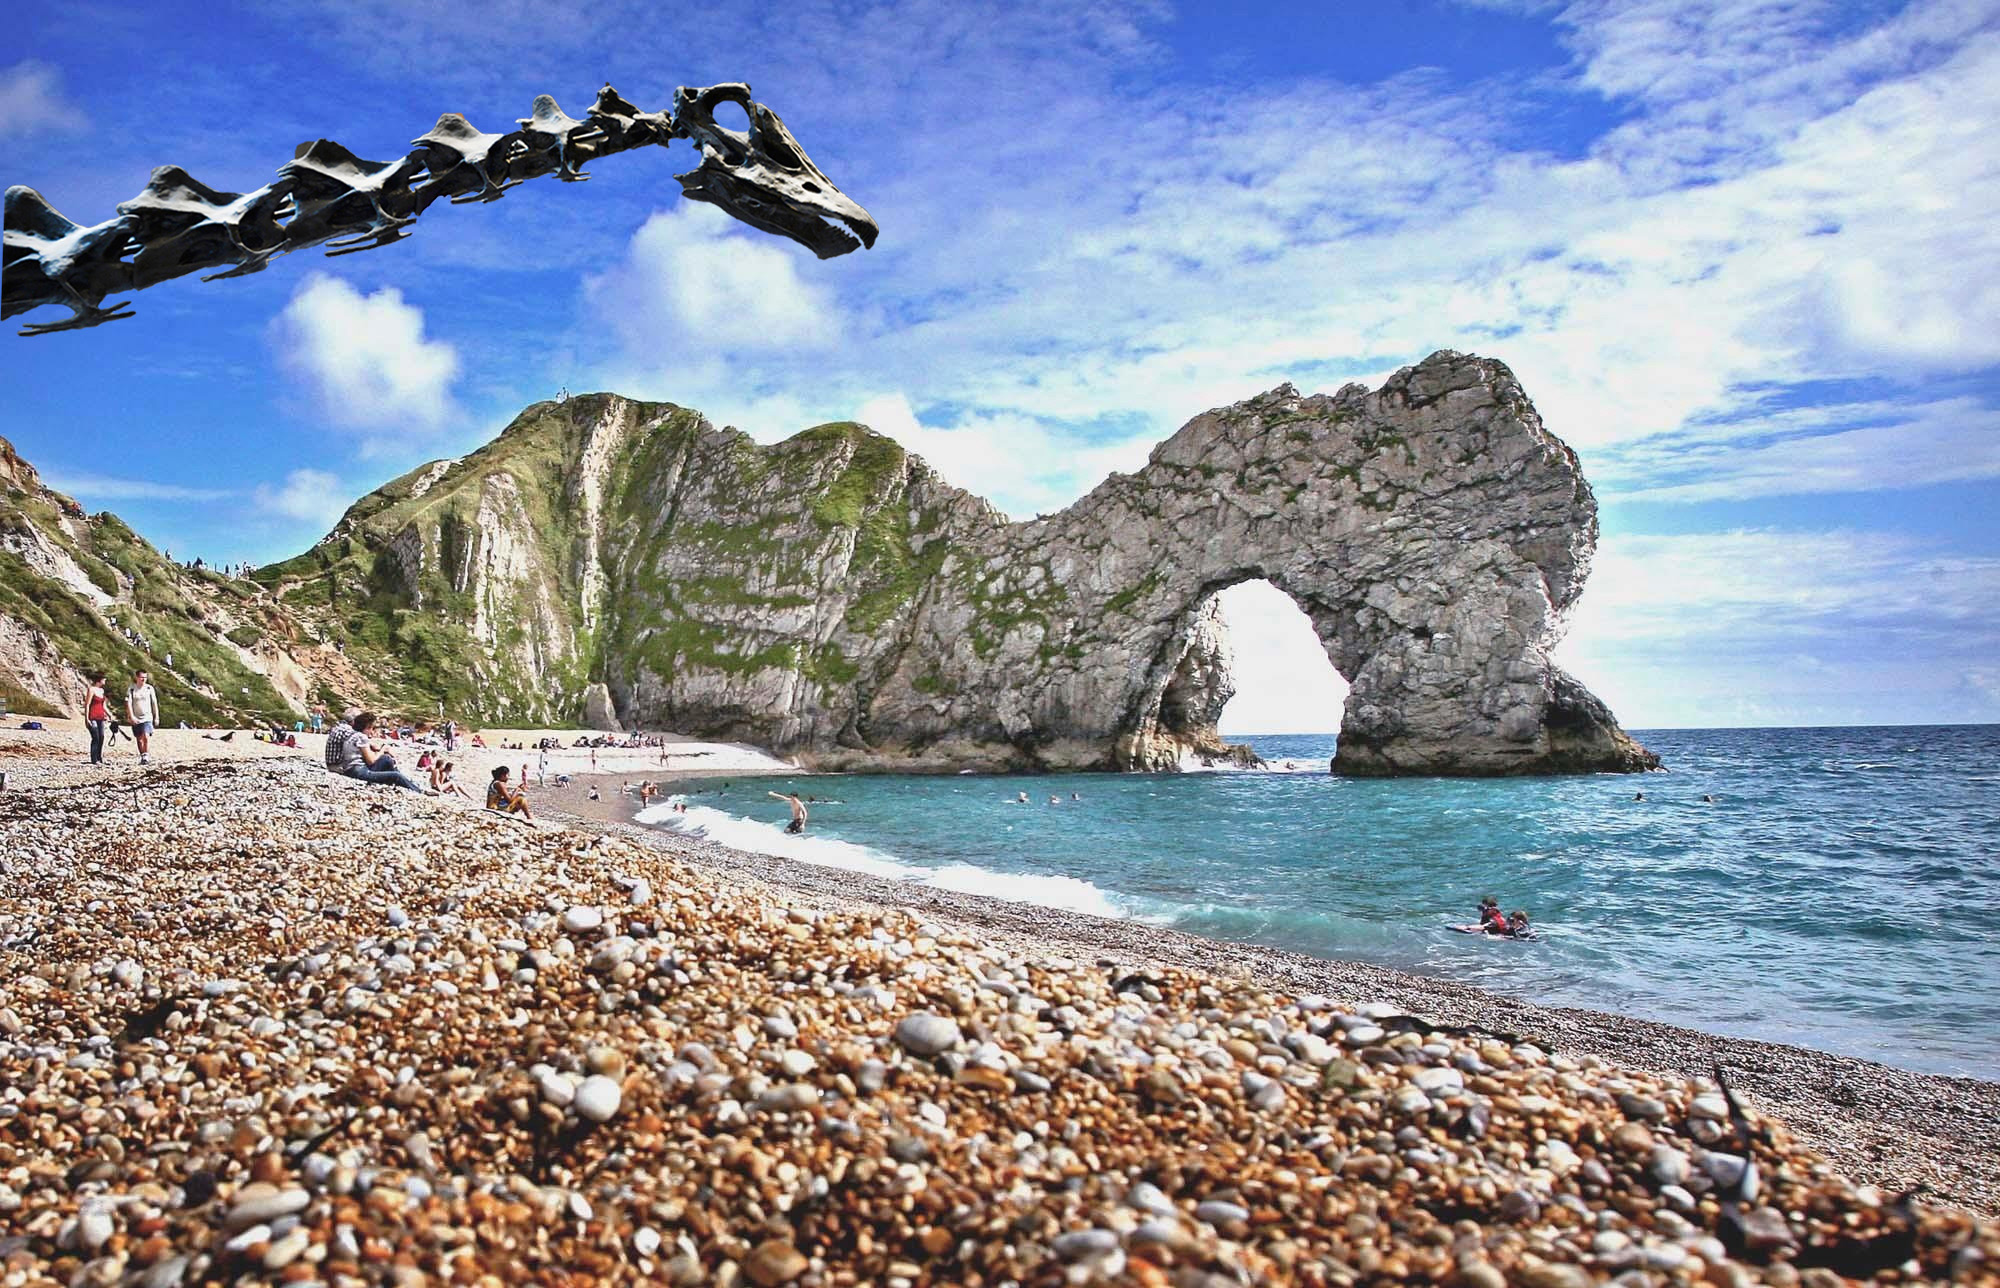 Two men jump off rocks into the sea at Durdle Door near West Lulworth, Dorset